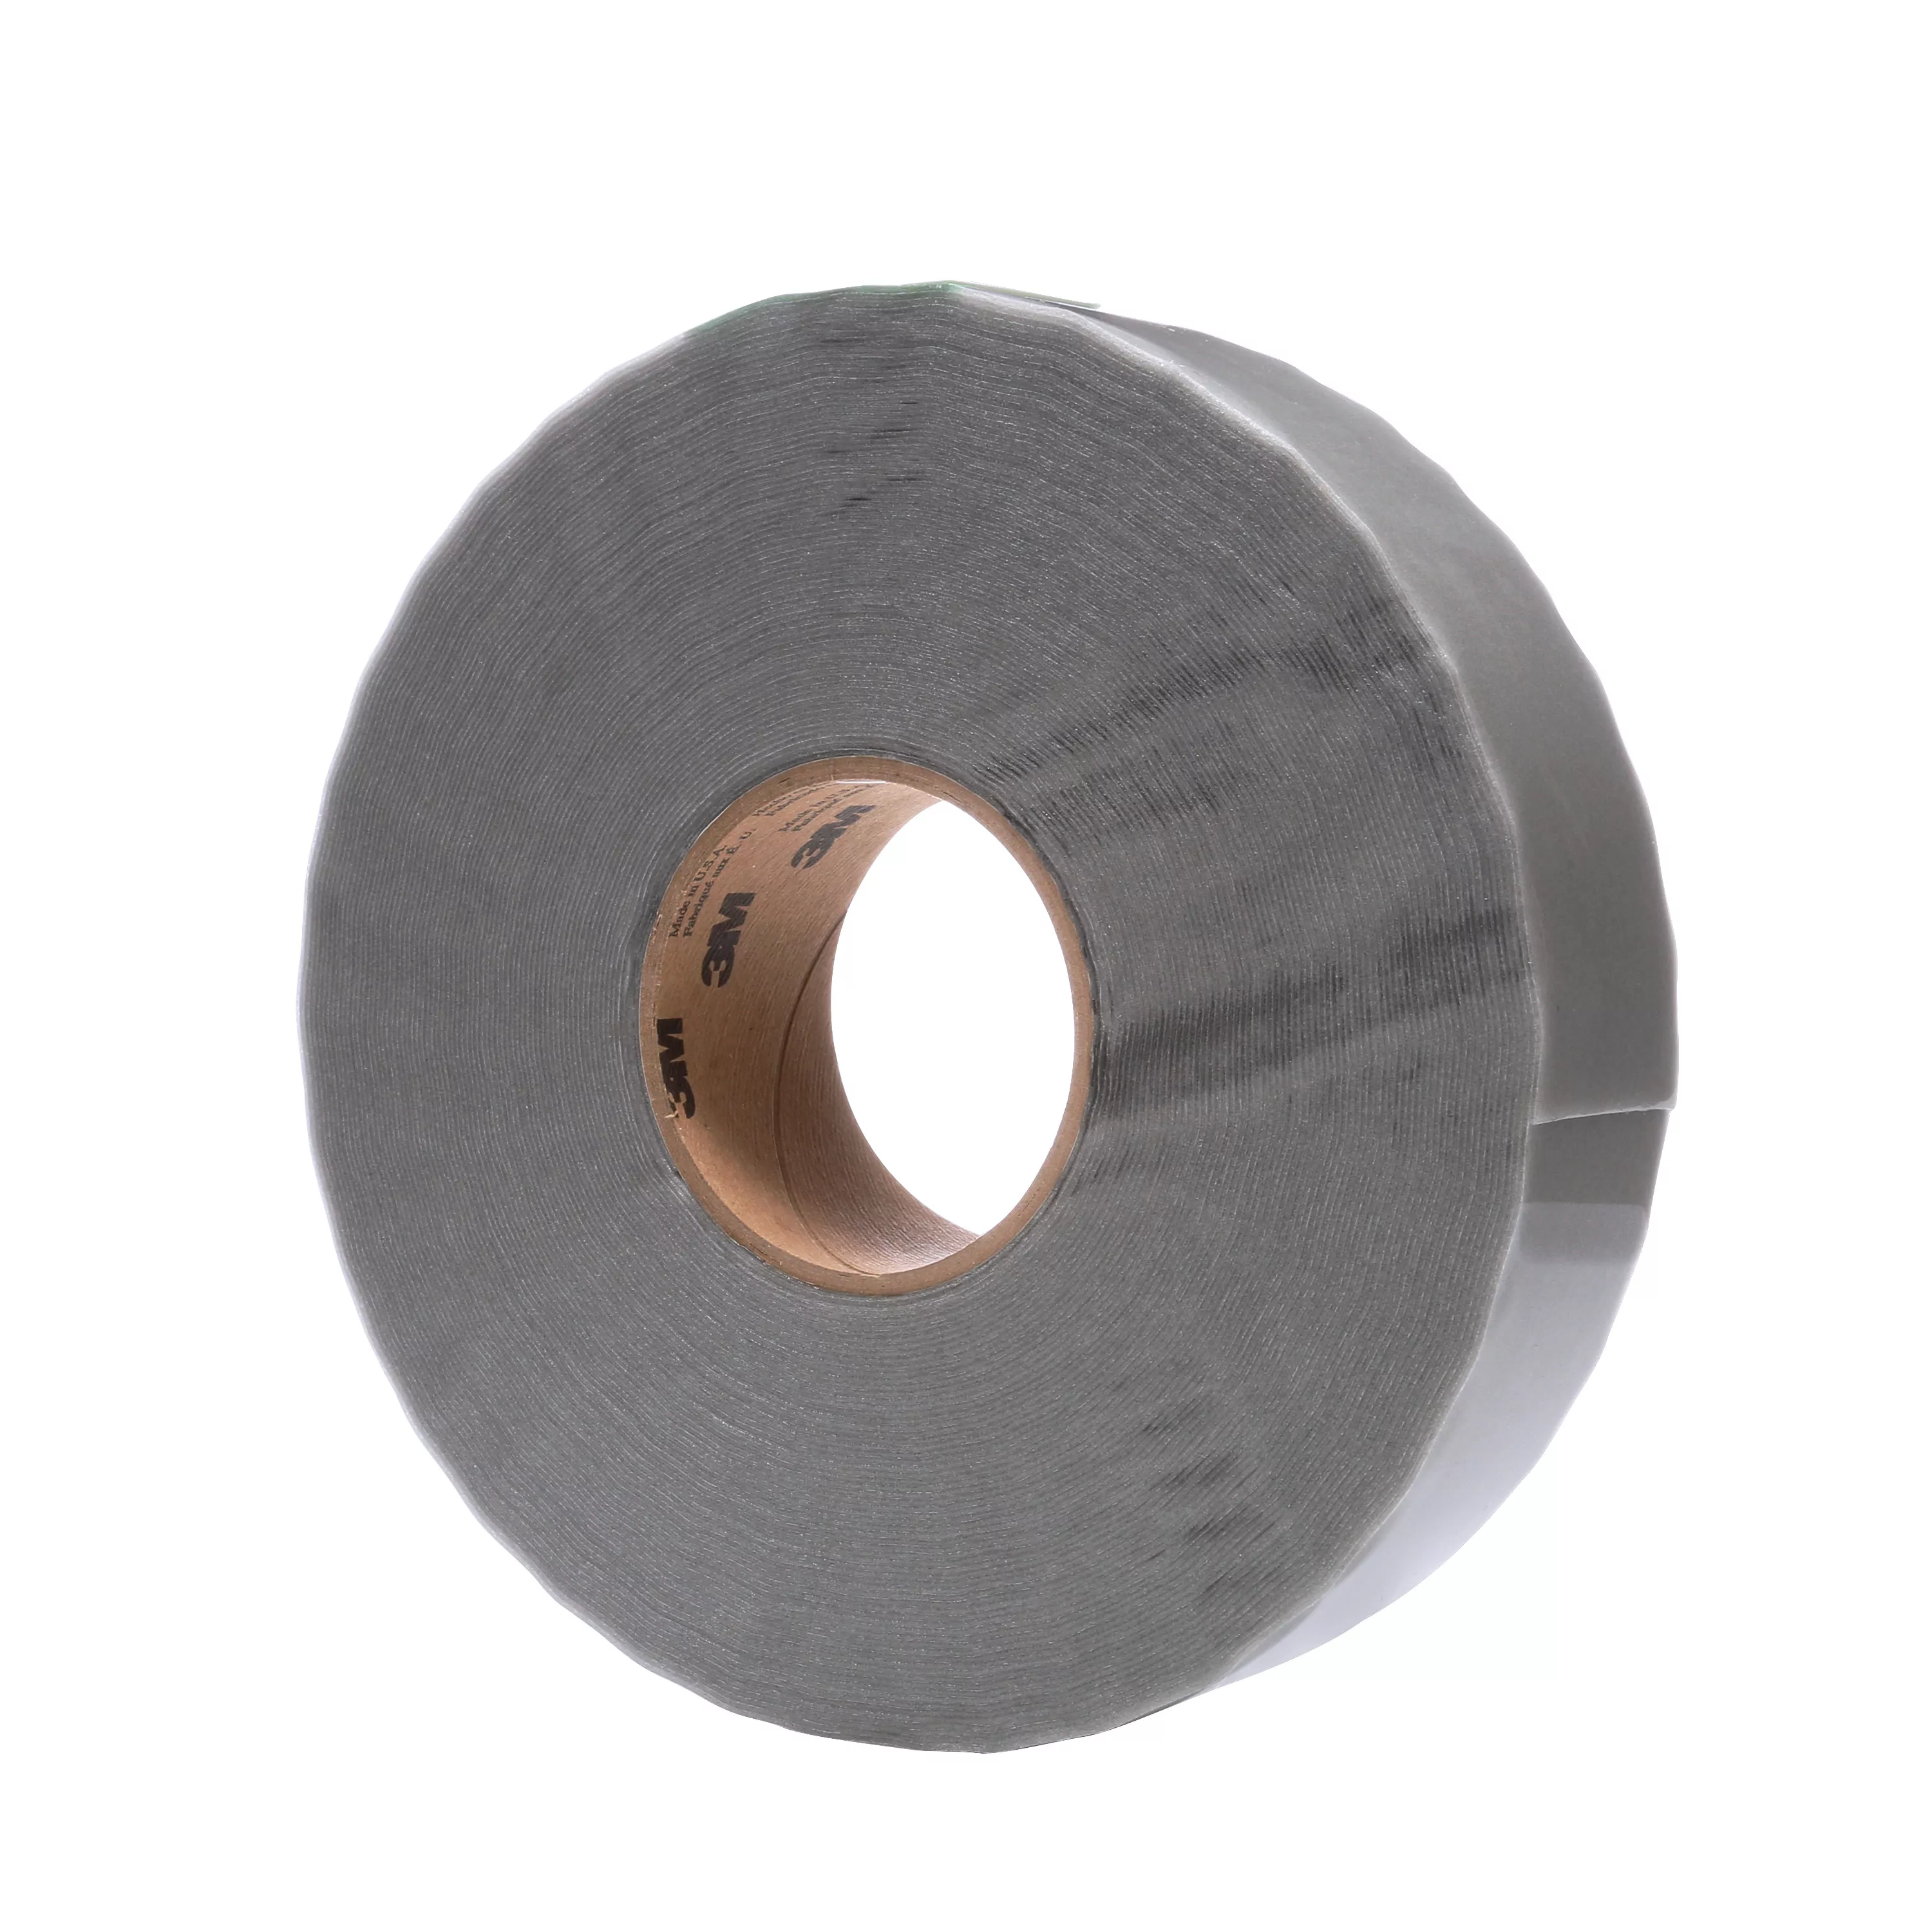 Product Number 4411G | 3M™ Extreme Sealing Tape 4411G